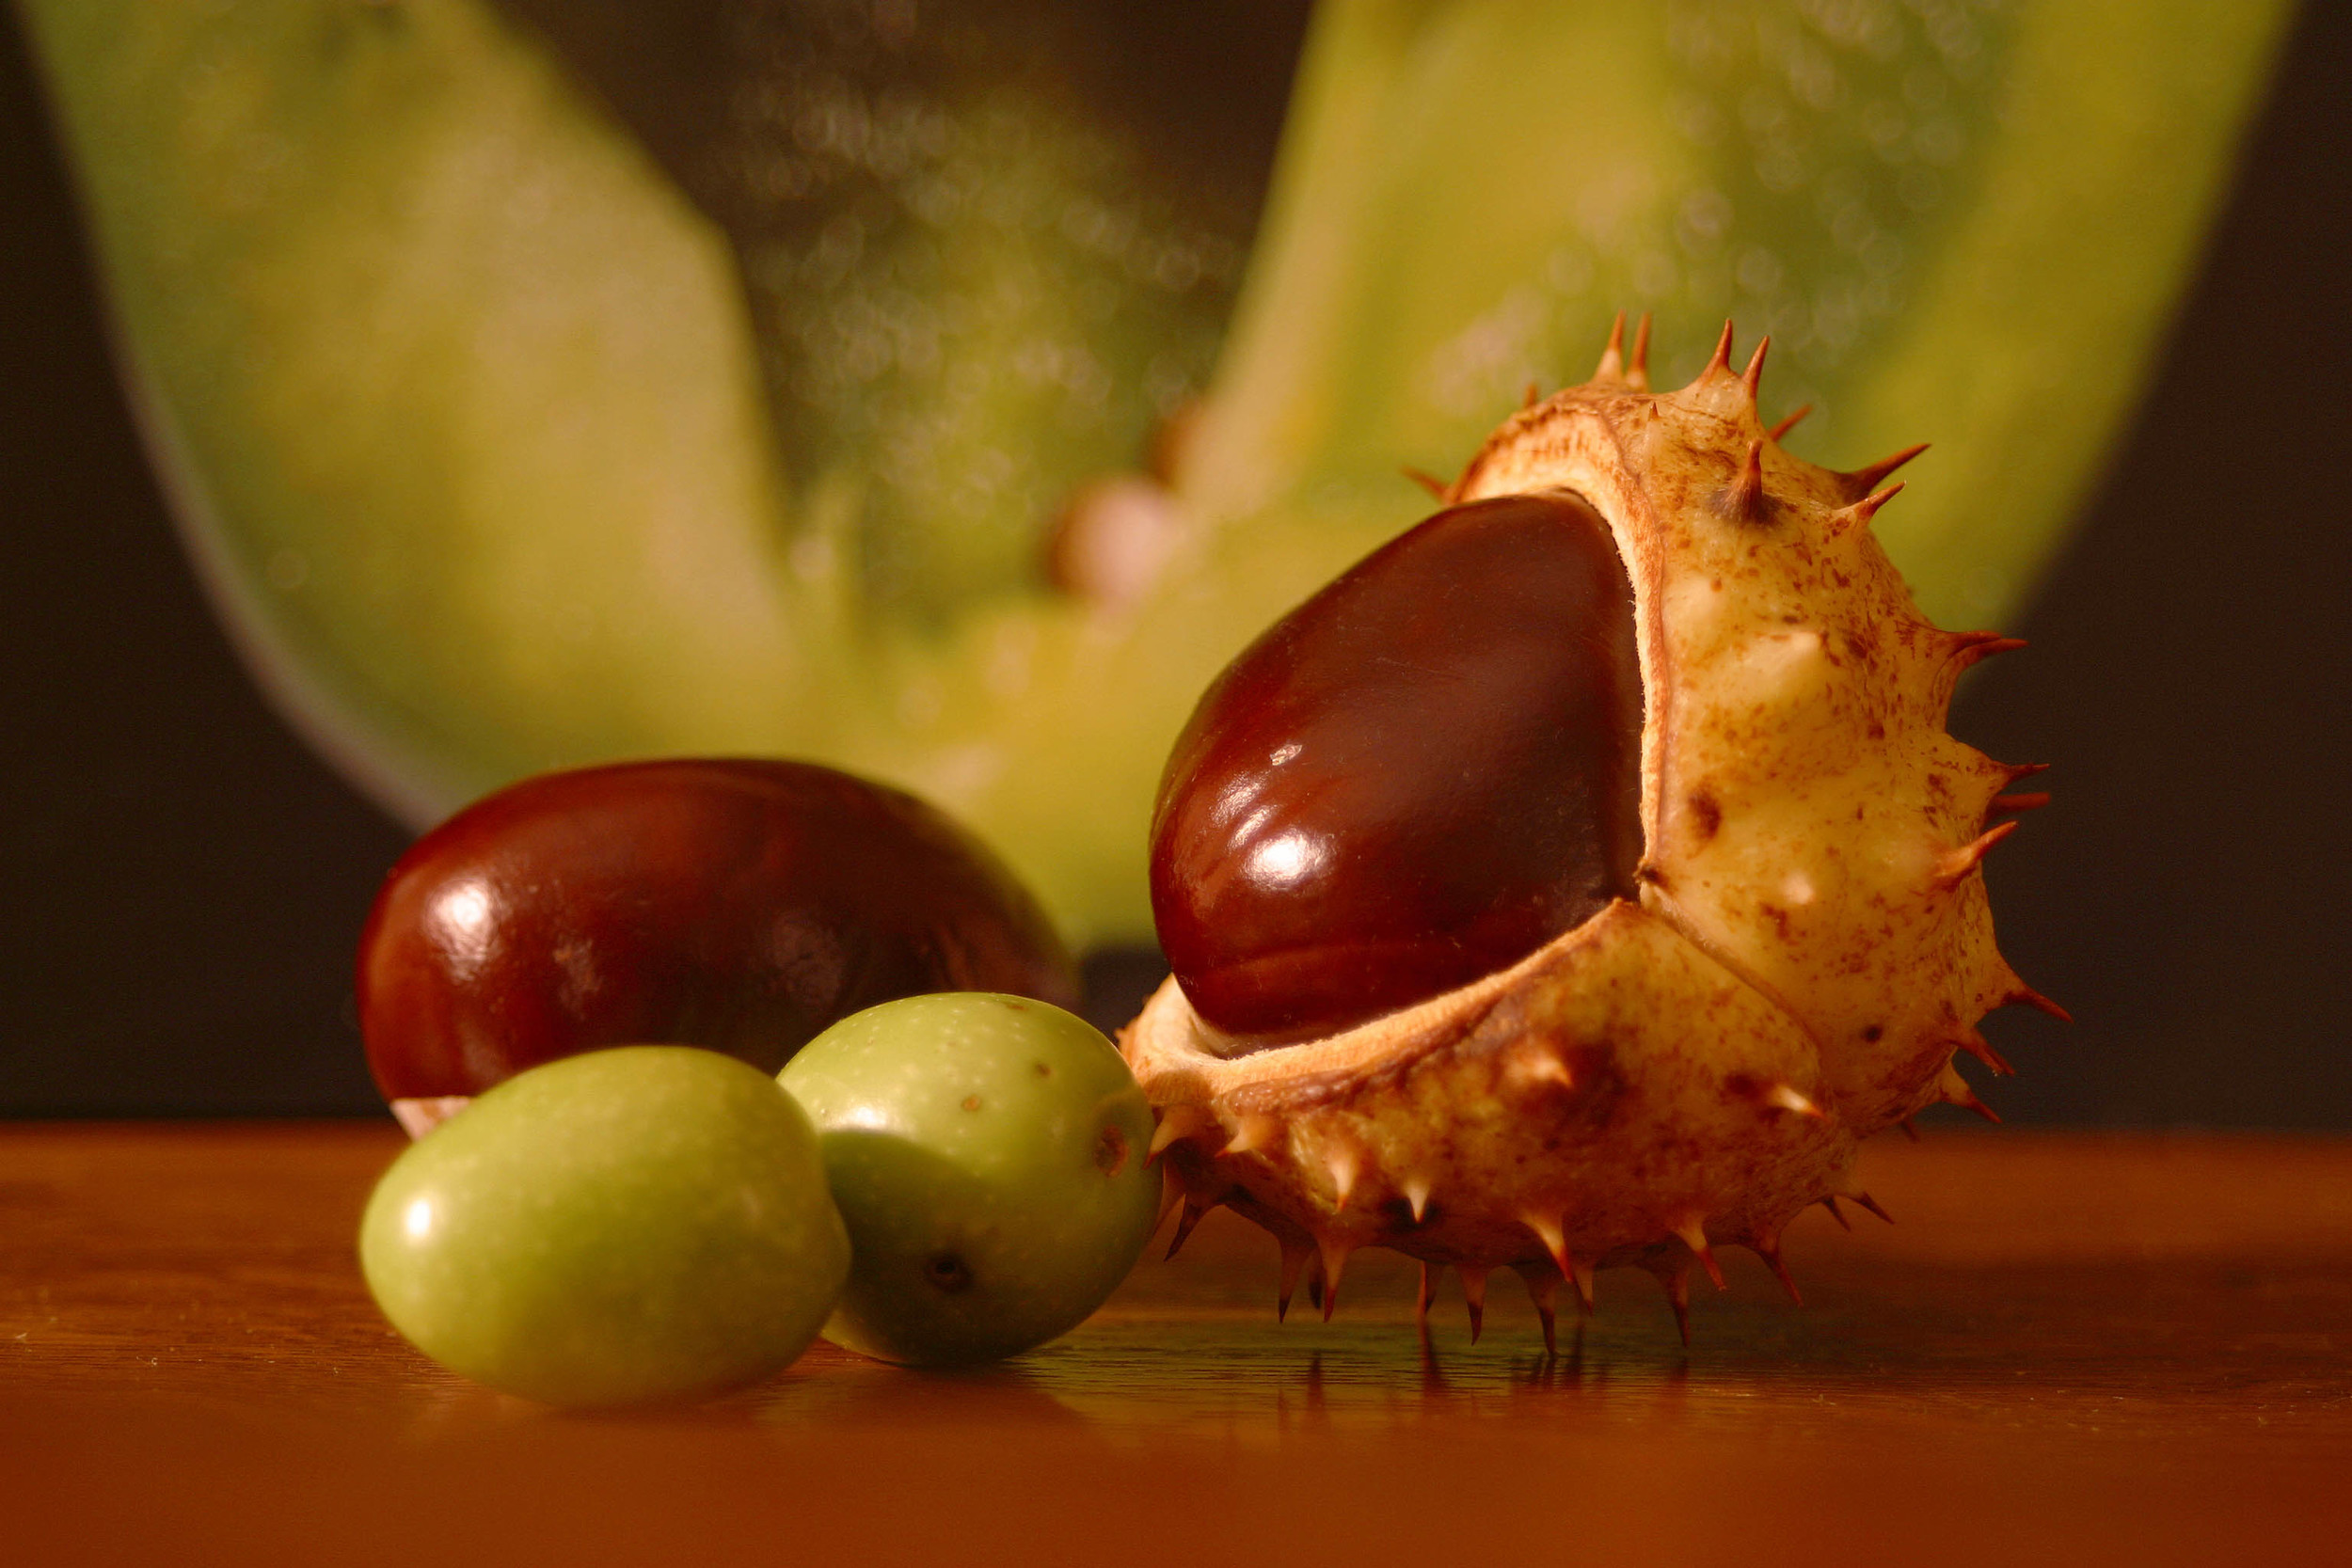 chestnuts and olives.jpg